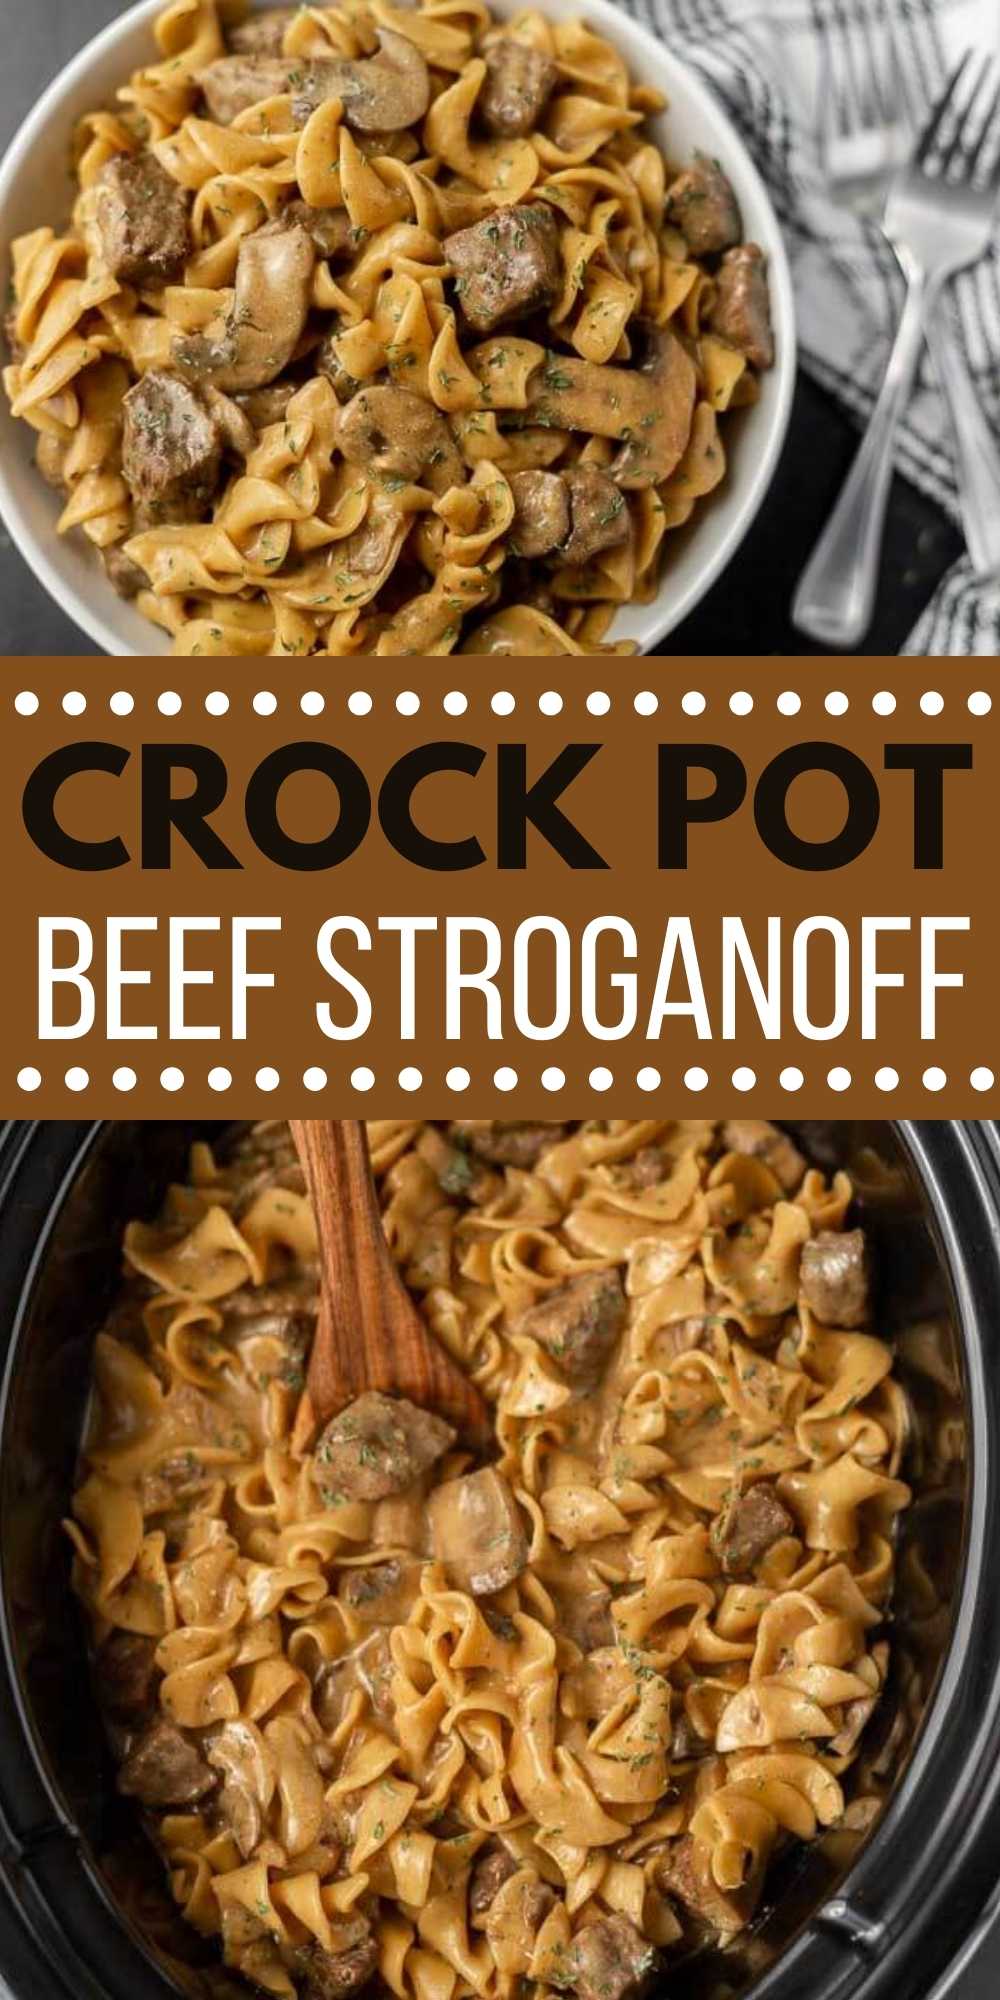 Try Easy Crock Pot Beef Stroganoff Recipe for an easy weeknight comfort meal. The meat is so tender and the cream sauce so flavorful. This slow cooker beef stroganoff with stew meat is super easy to make in a crock pot and the entire family loves it.  #eatingonadime #crockpotrecipes #slowcookerrecipes #beefrecipes 